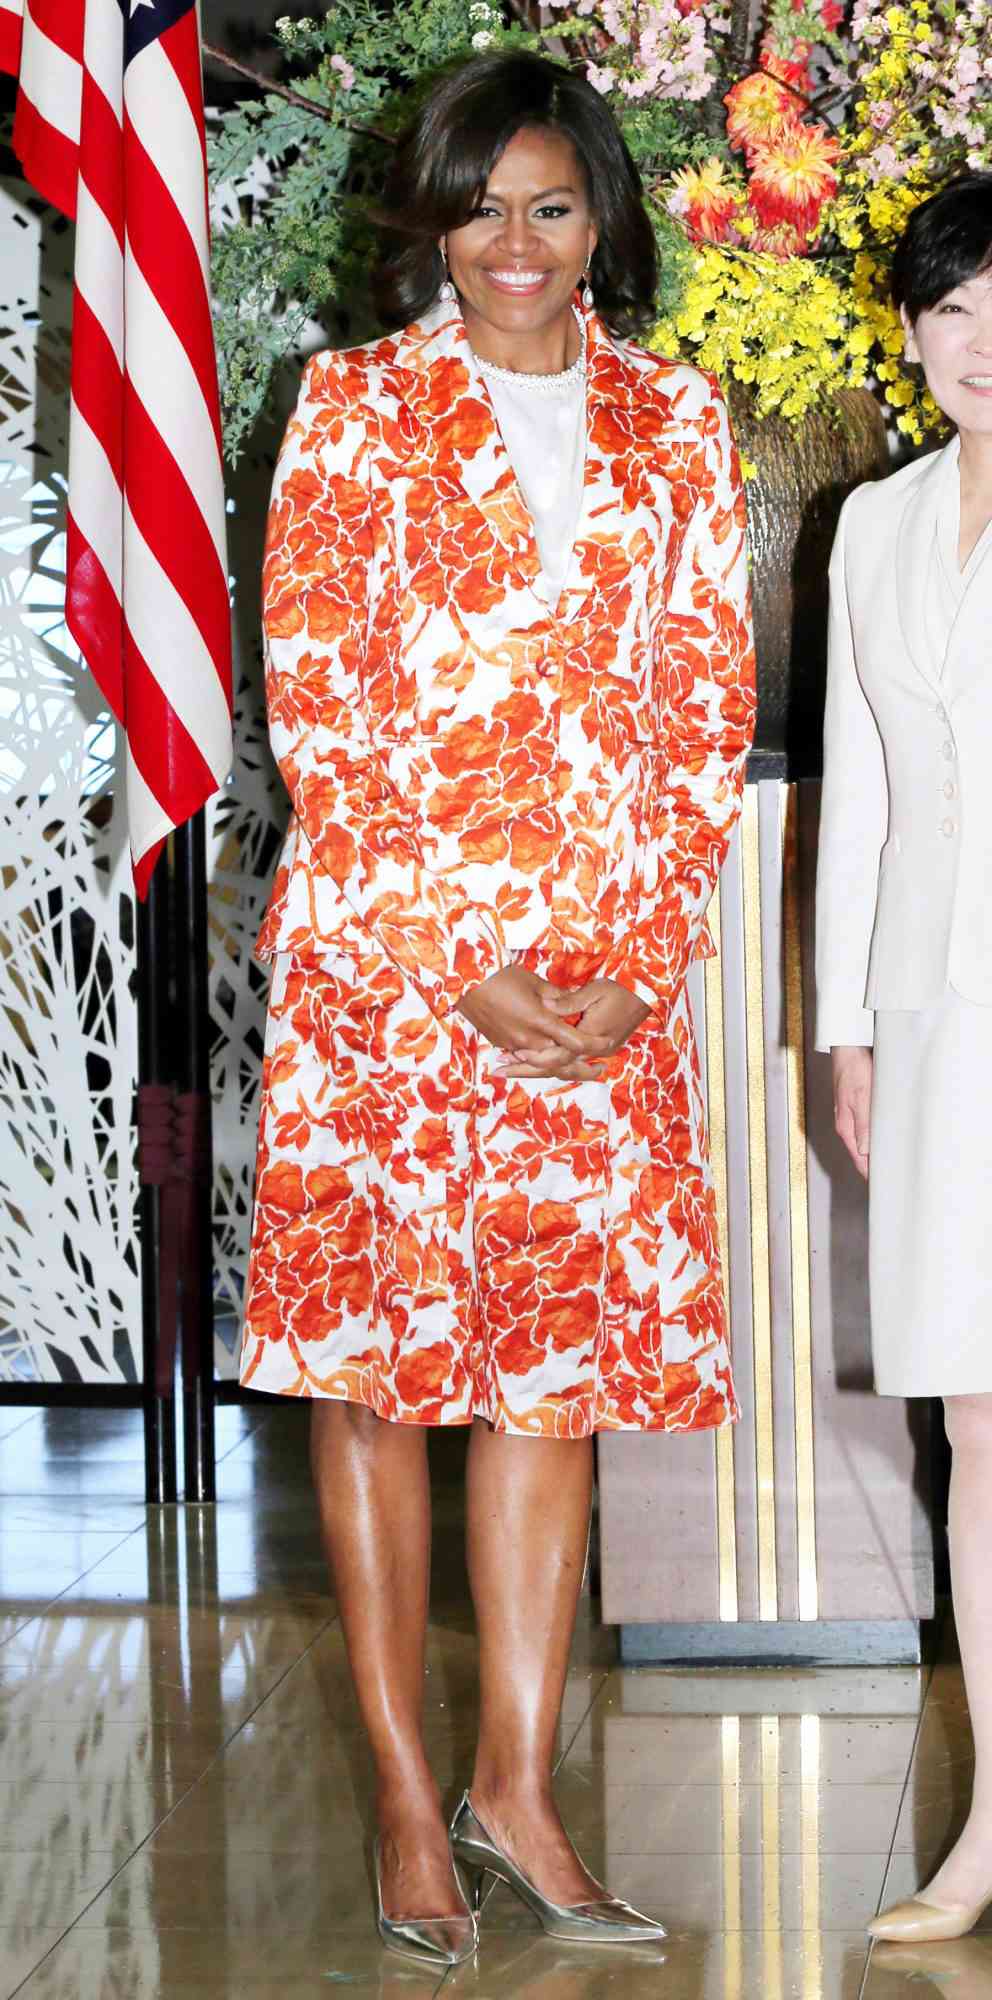 U.S. First Lady Michelle Obama Visits Japan - Day 2